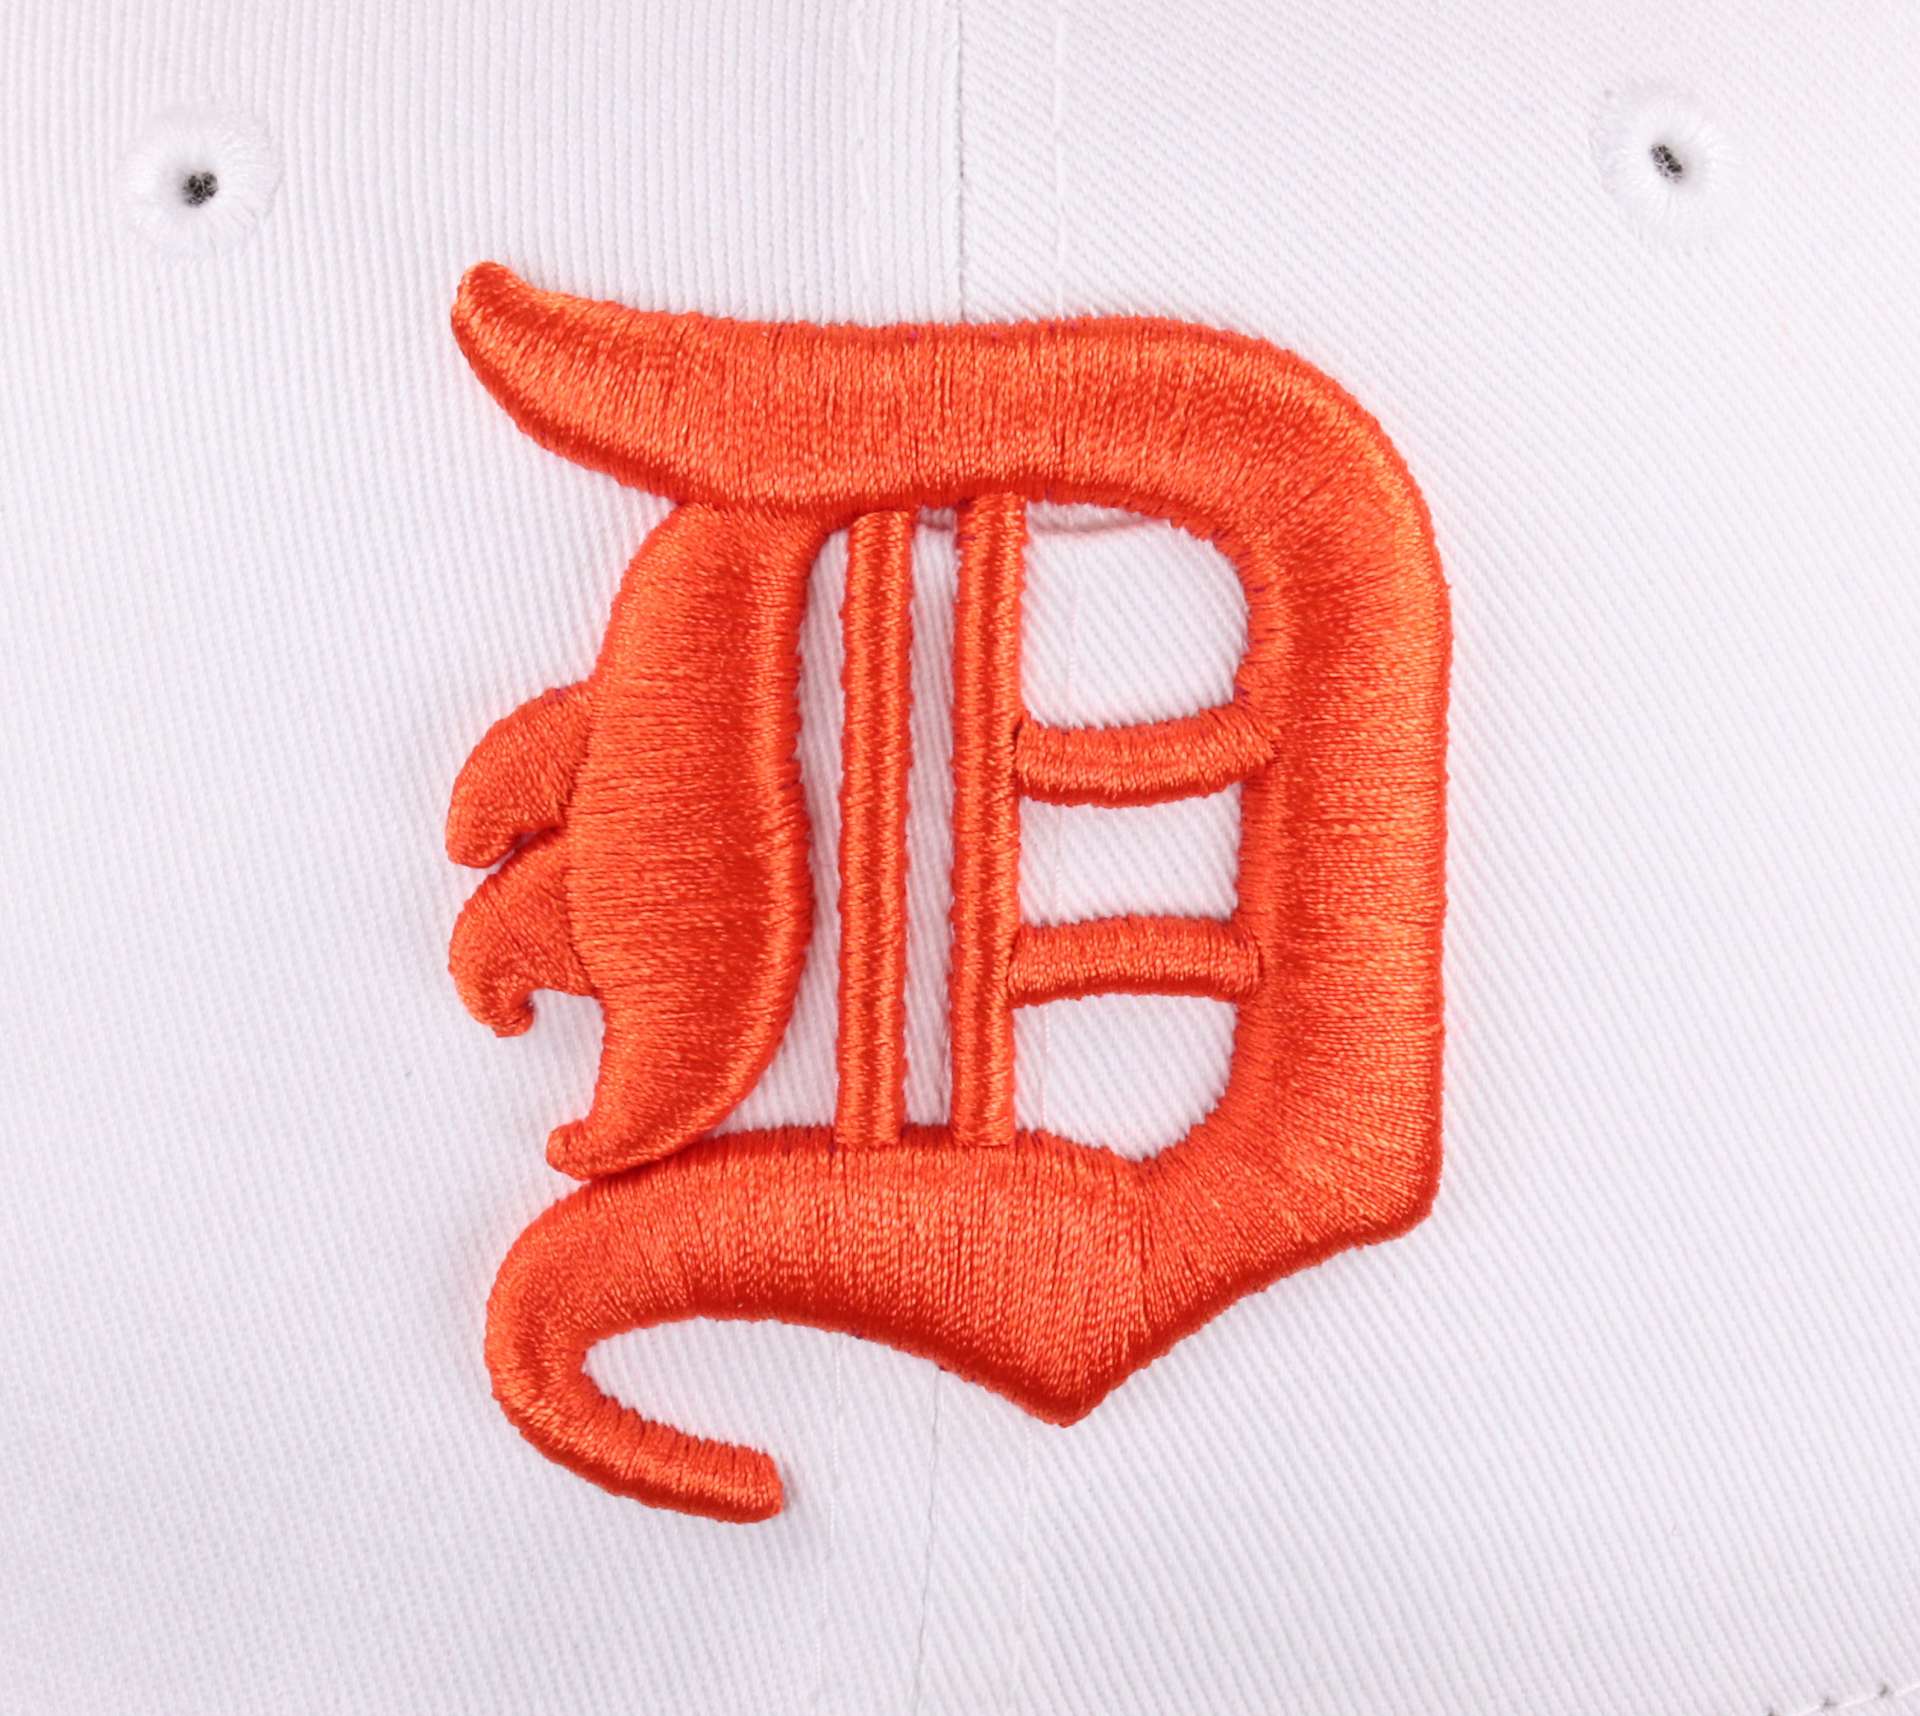 Detroit Tigers Side Patch World Series 1909 MLB White 59Fifty Basecap New Era